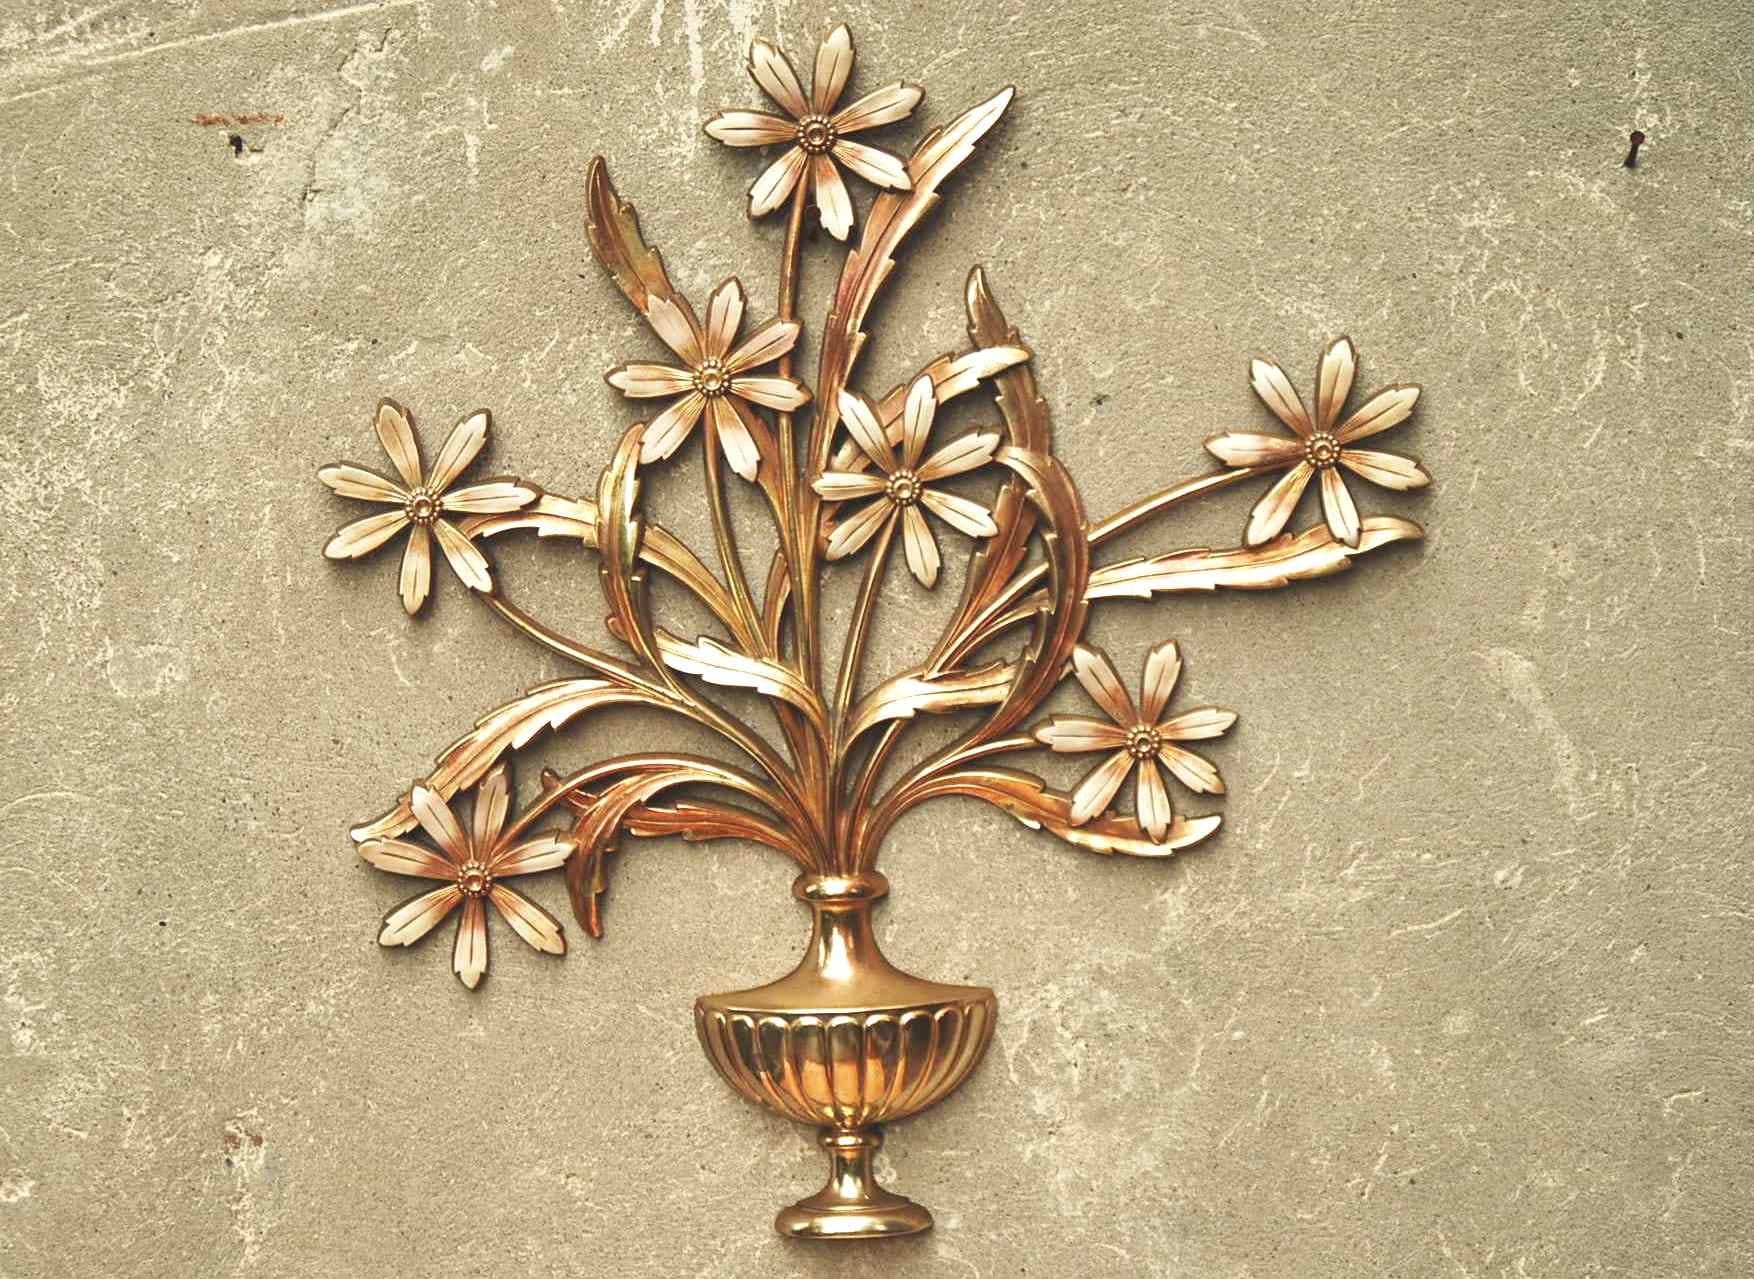 I Like Mike's Mid-Century Modern Wall Decor & Art Syroco Large Gilded Floral Arrangement Wall Hanging - Gold & White